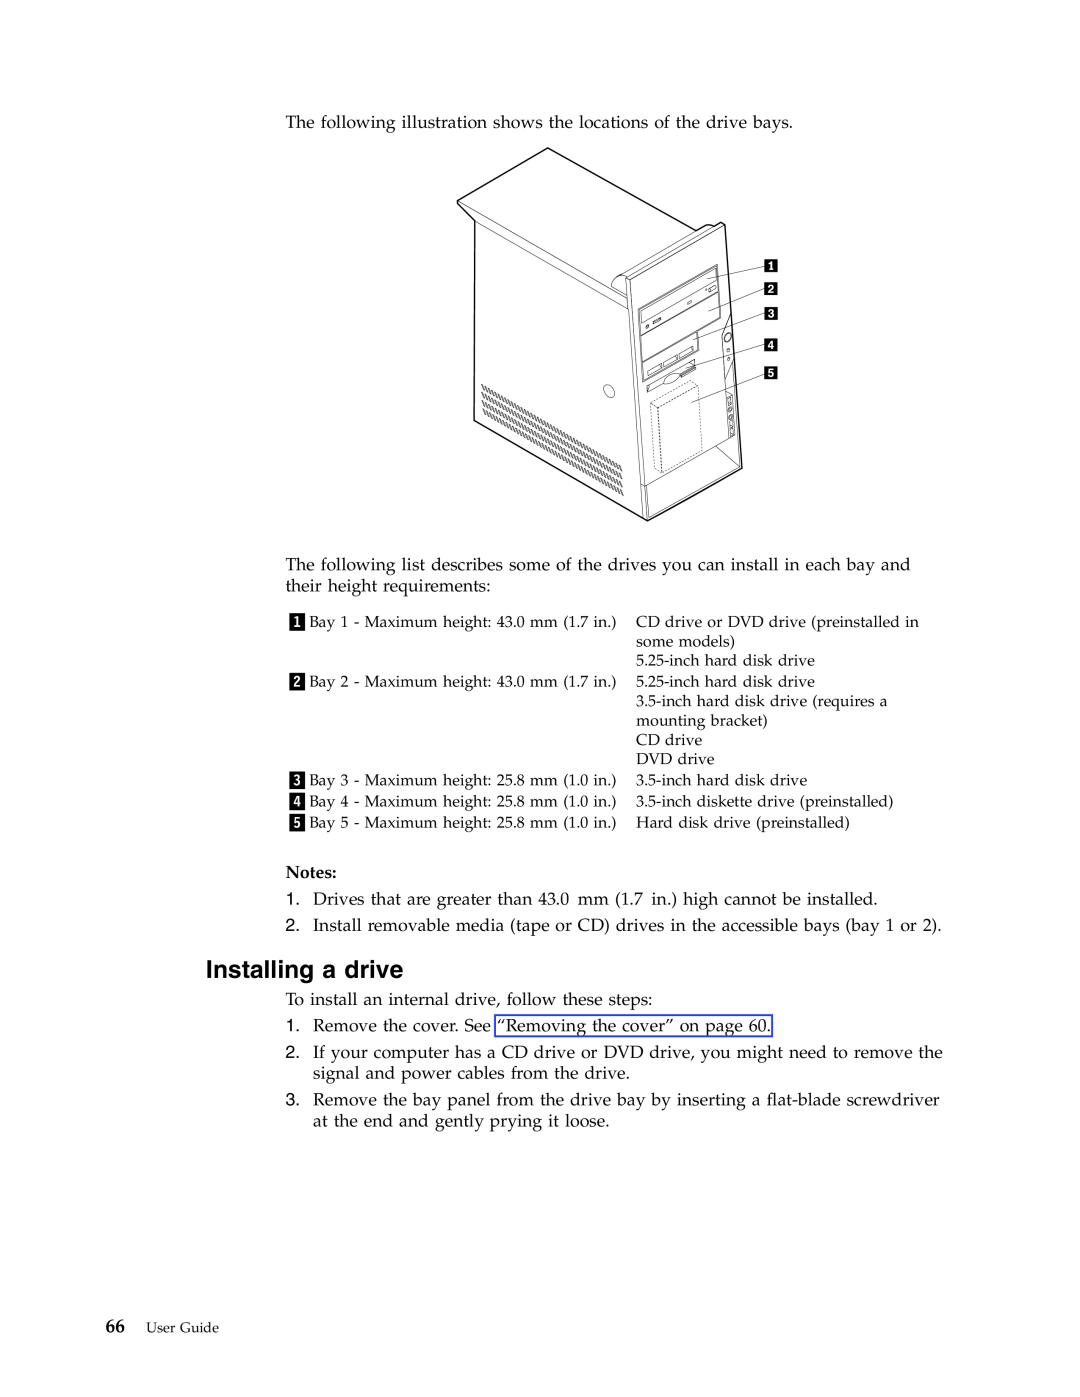 Lenovo M50e Series, A50 manual Installing a drive, To install an internal drive, follow these steps 